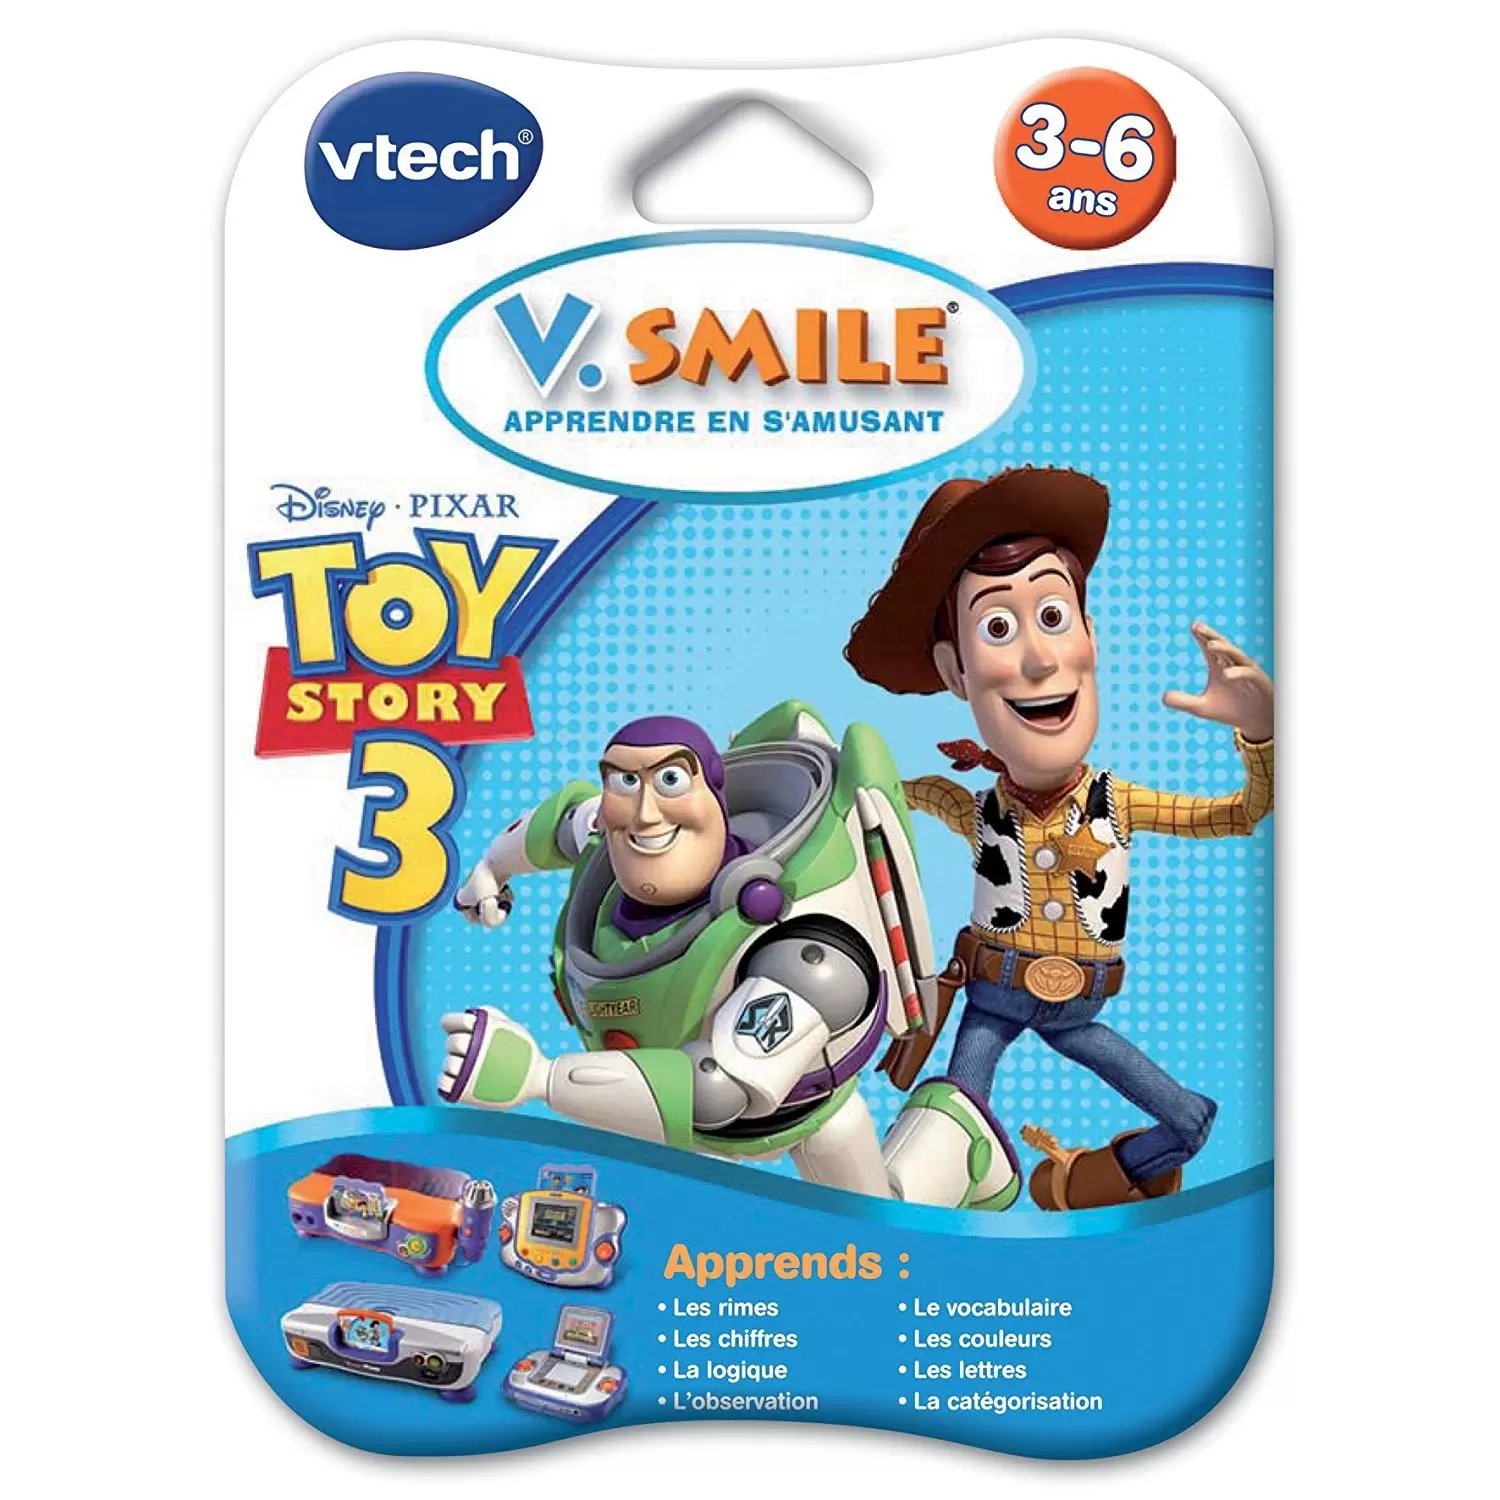 Vtech Games - Toy Story 3